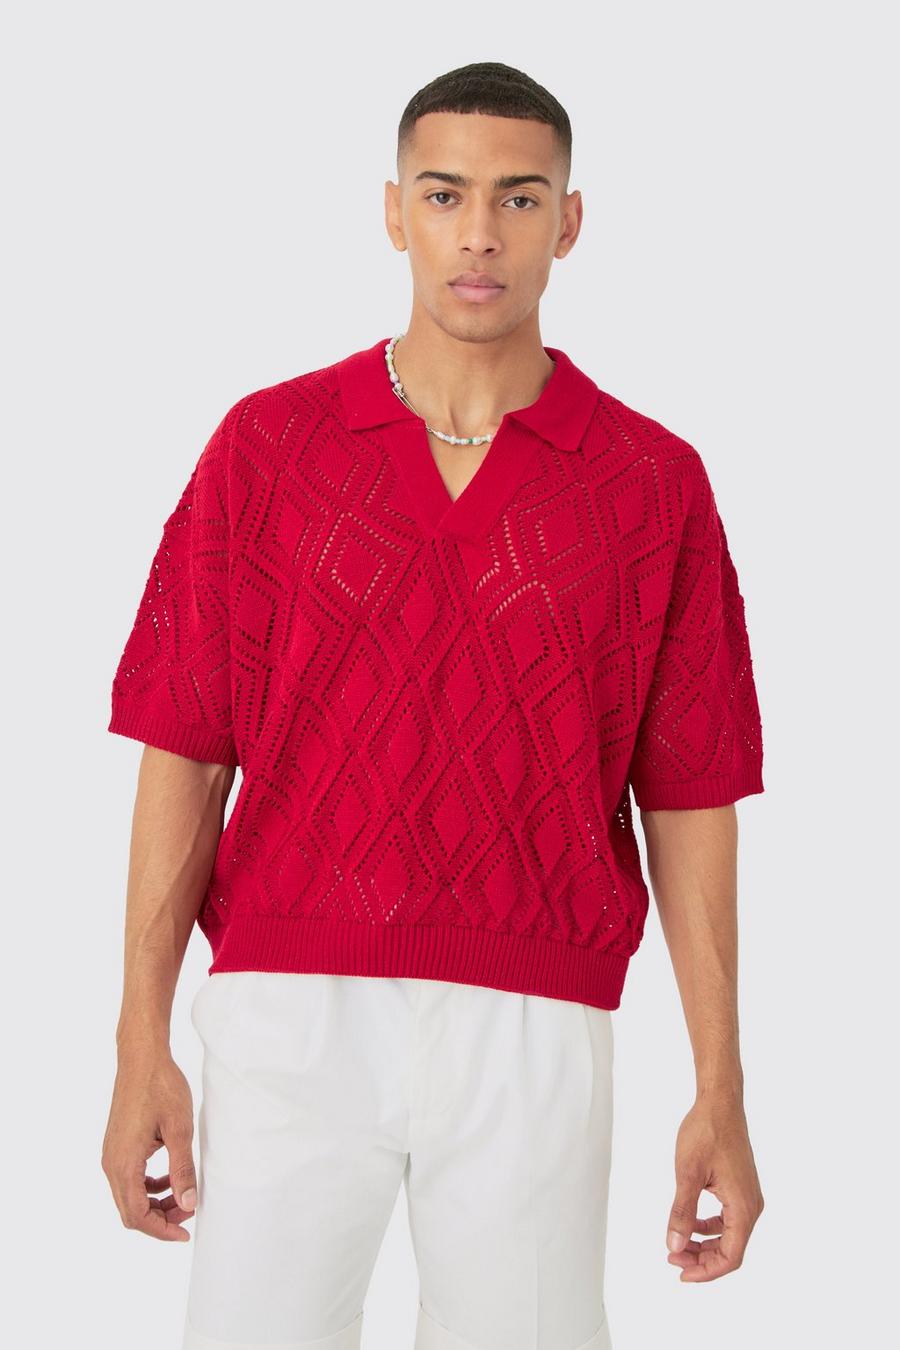 Red Boxy Oversized Patterned Open Stitch Knitted Polo